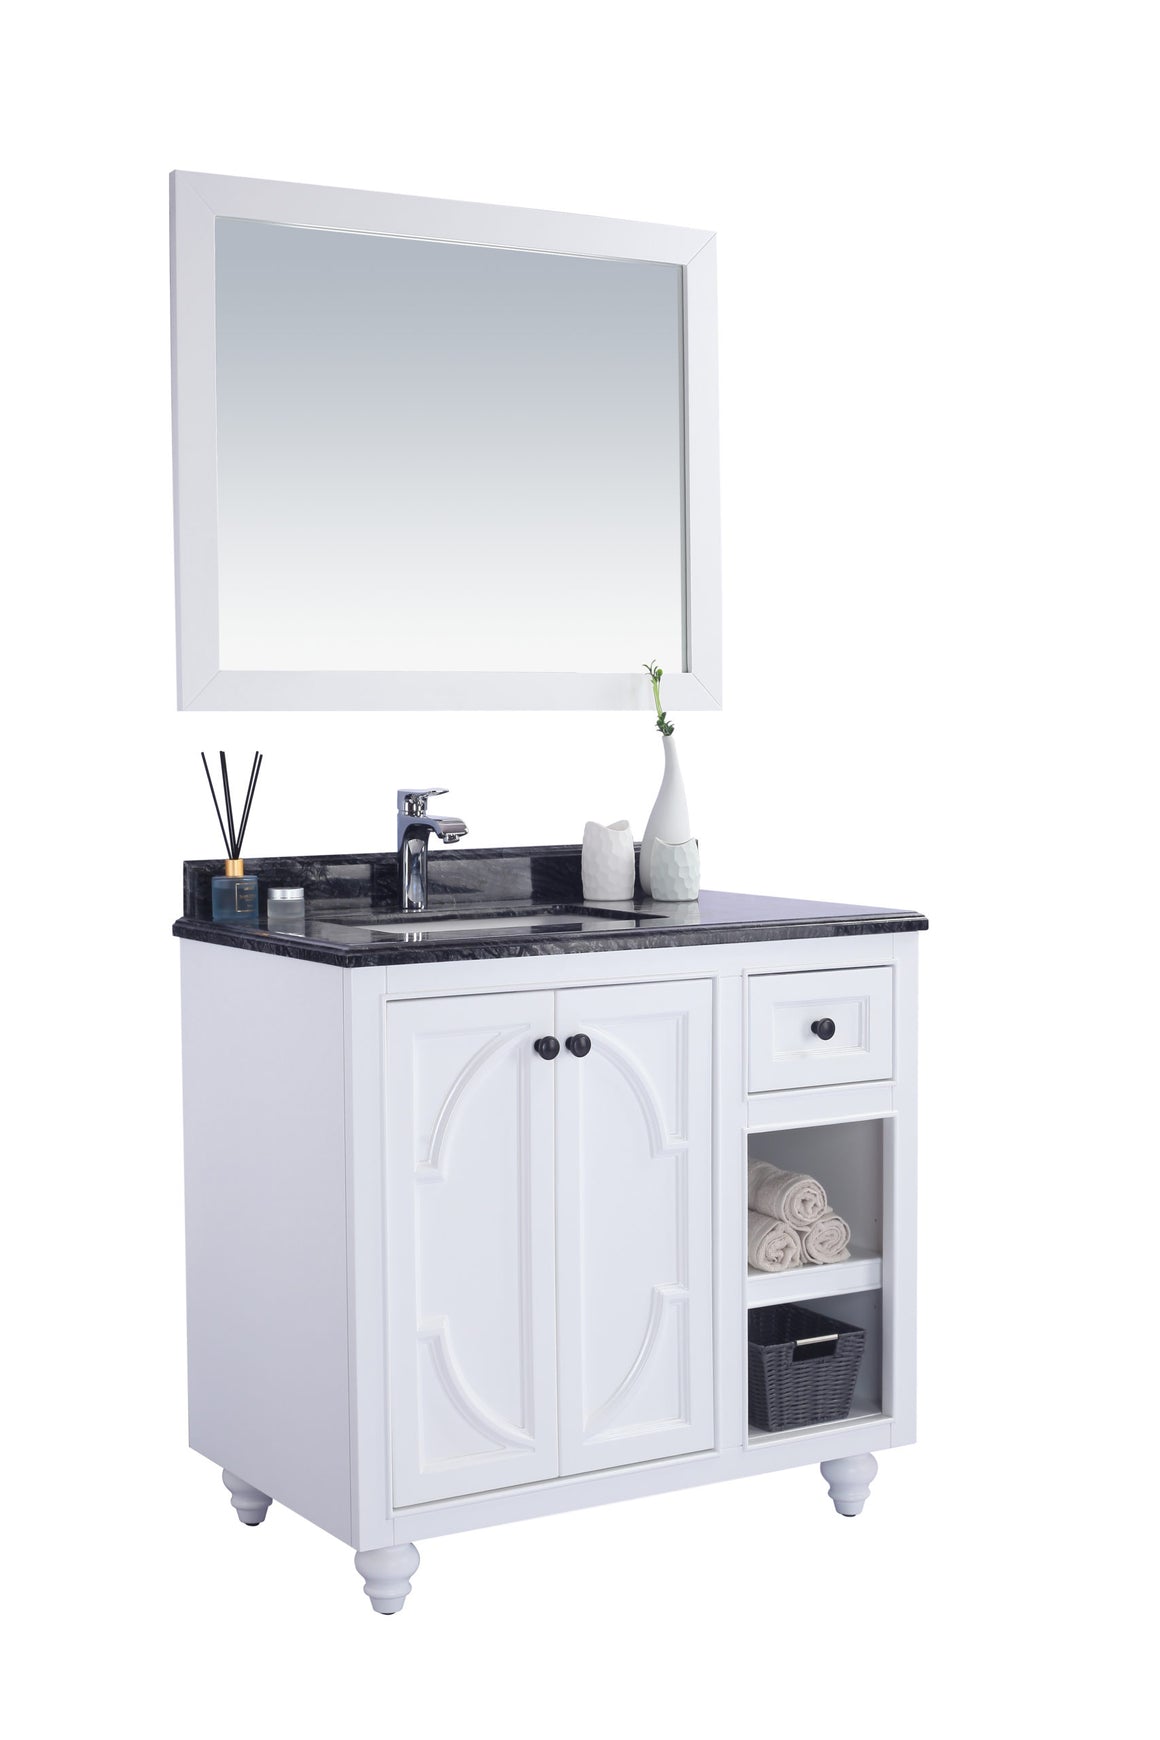 Odyssey - 36 - White Cabinet + Black Wood Marble Countertop